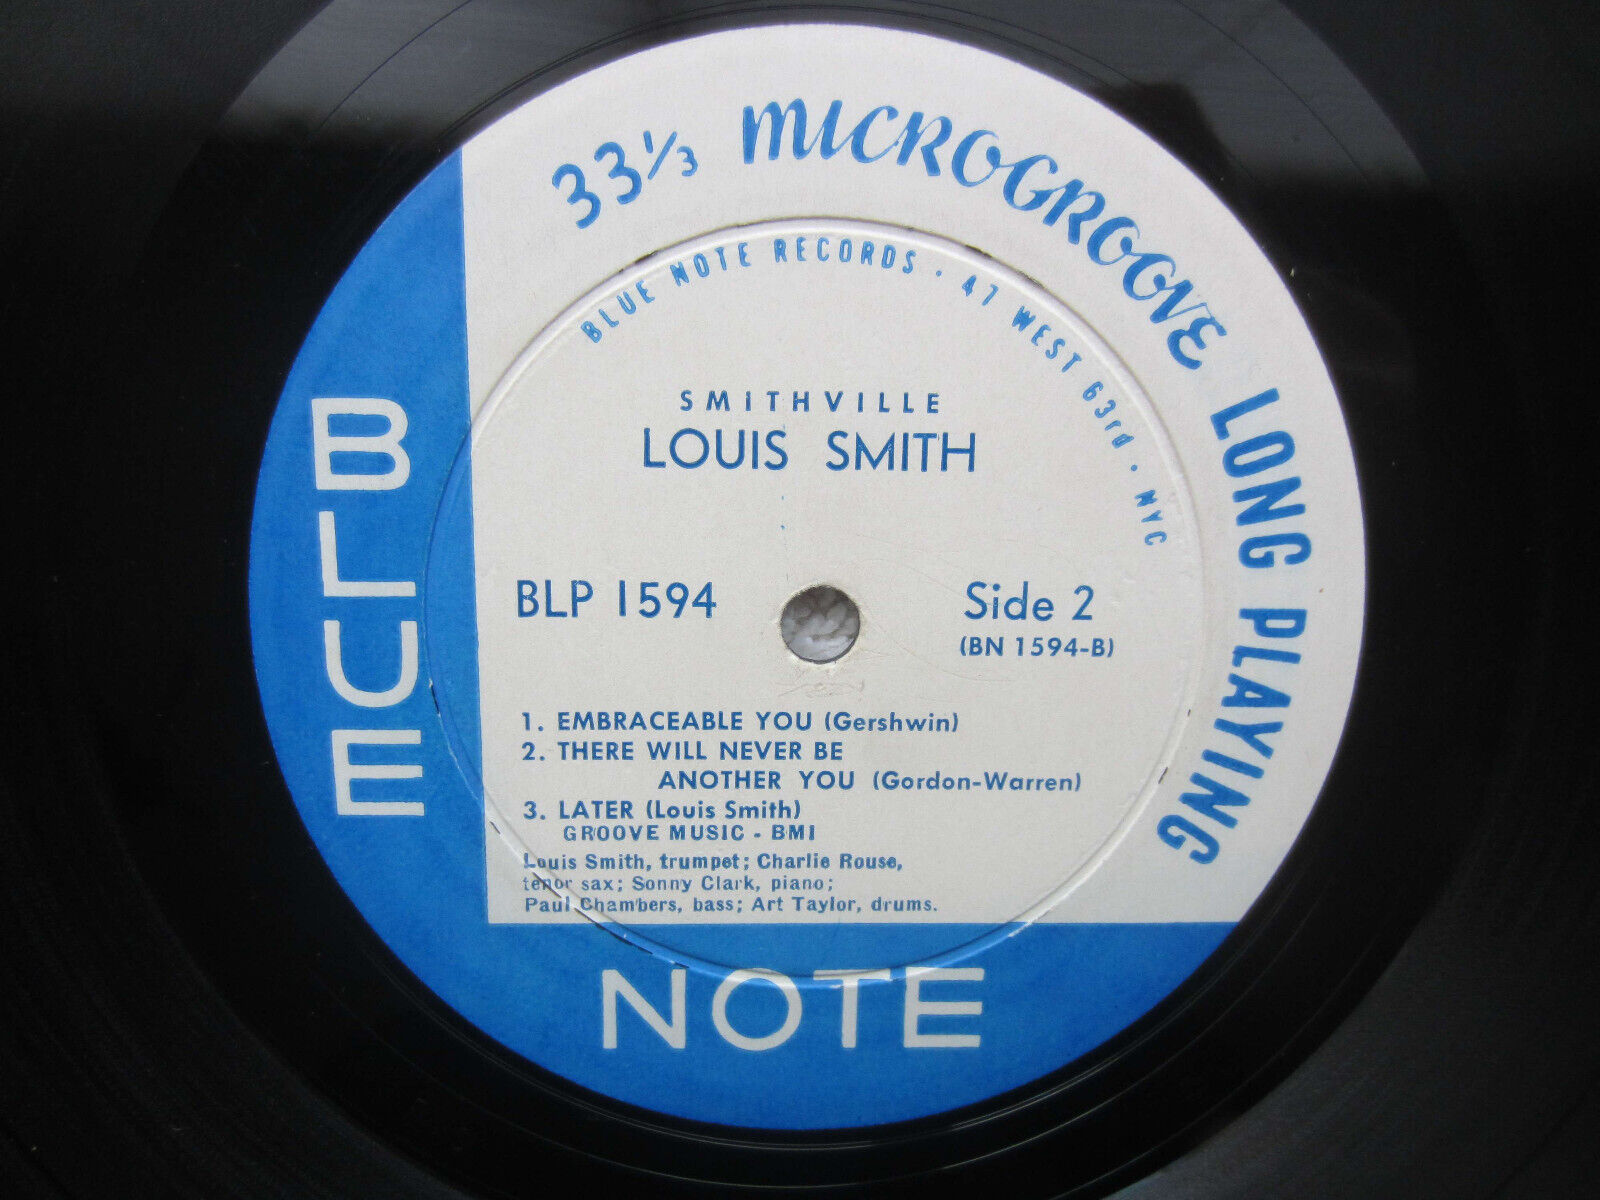 Pic 4 LOUIS SMITH  BLUE NOTE 1594  ORIG. 47 WEST 63RD ST. EAR/P, RVG, DG